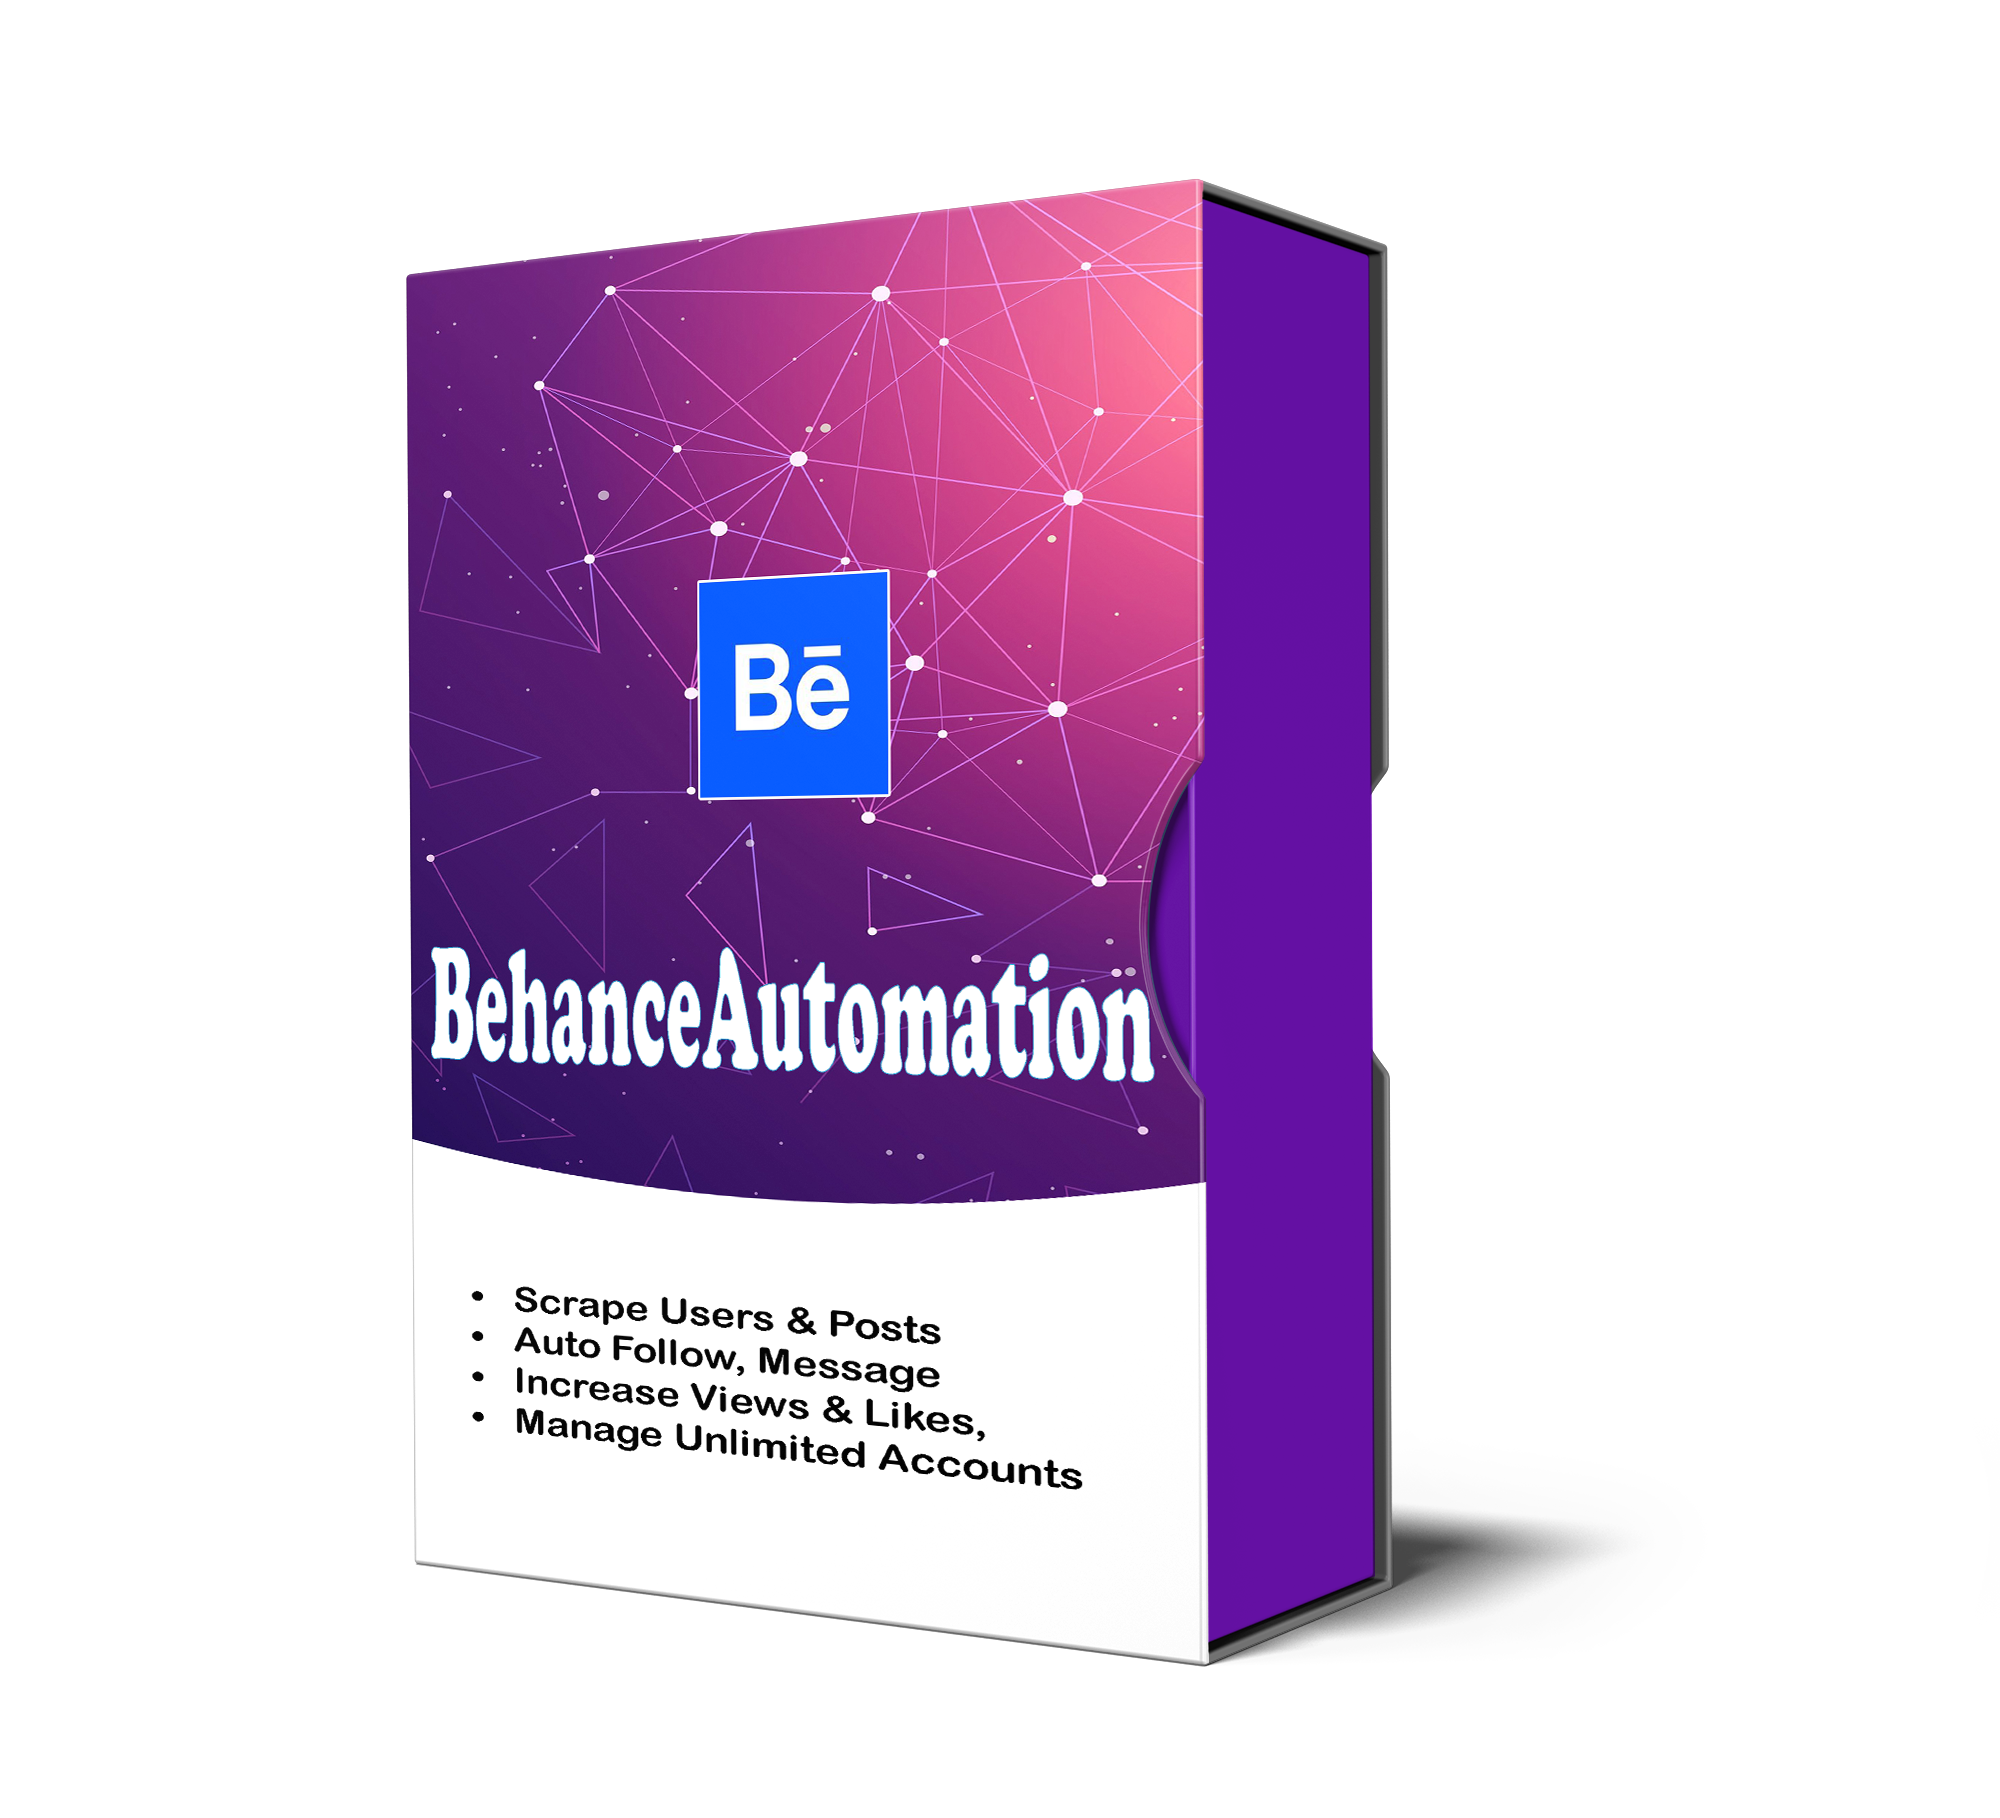 BehanceAutomation